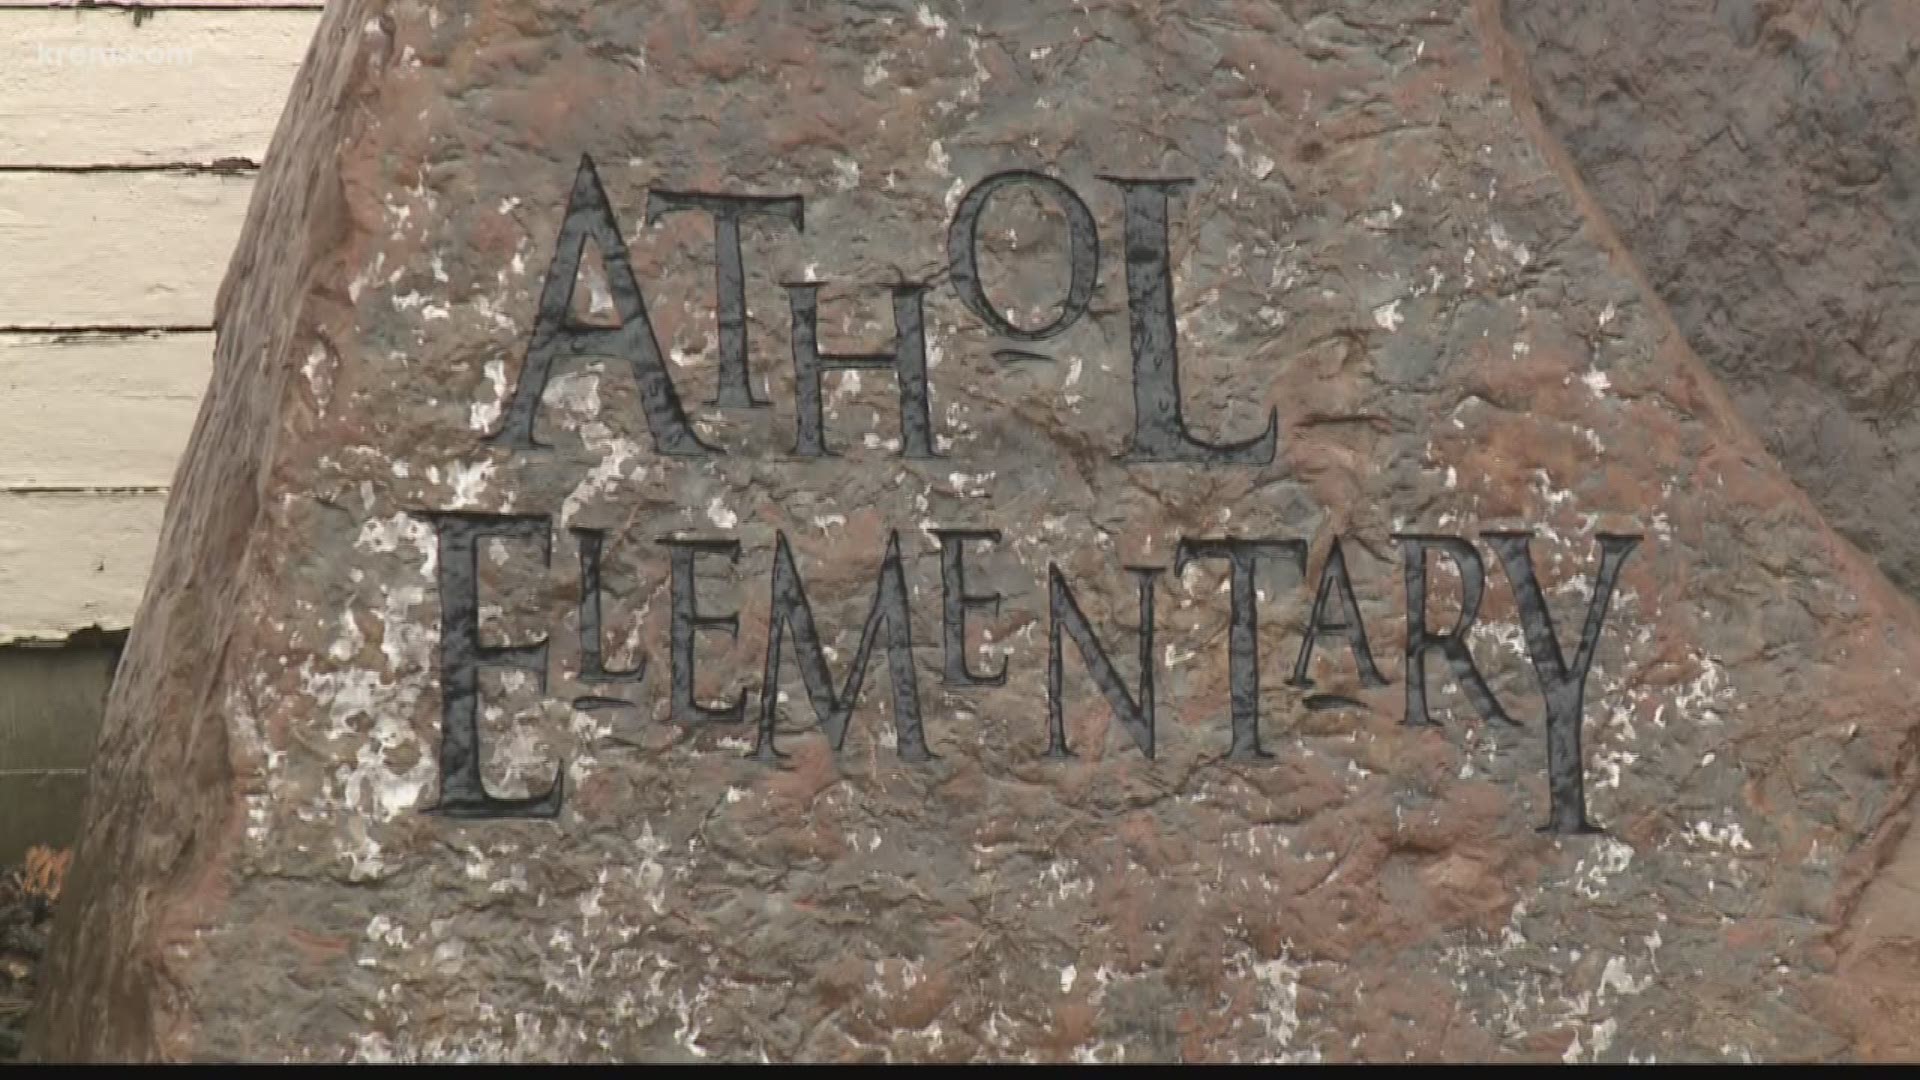 An Athol Elementary School says you can call them one of safest grade schools in North Idaho. This month, the Lakeland School district started putting their new armed guard to work.